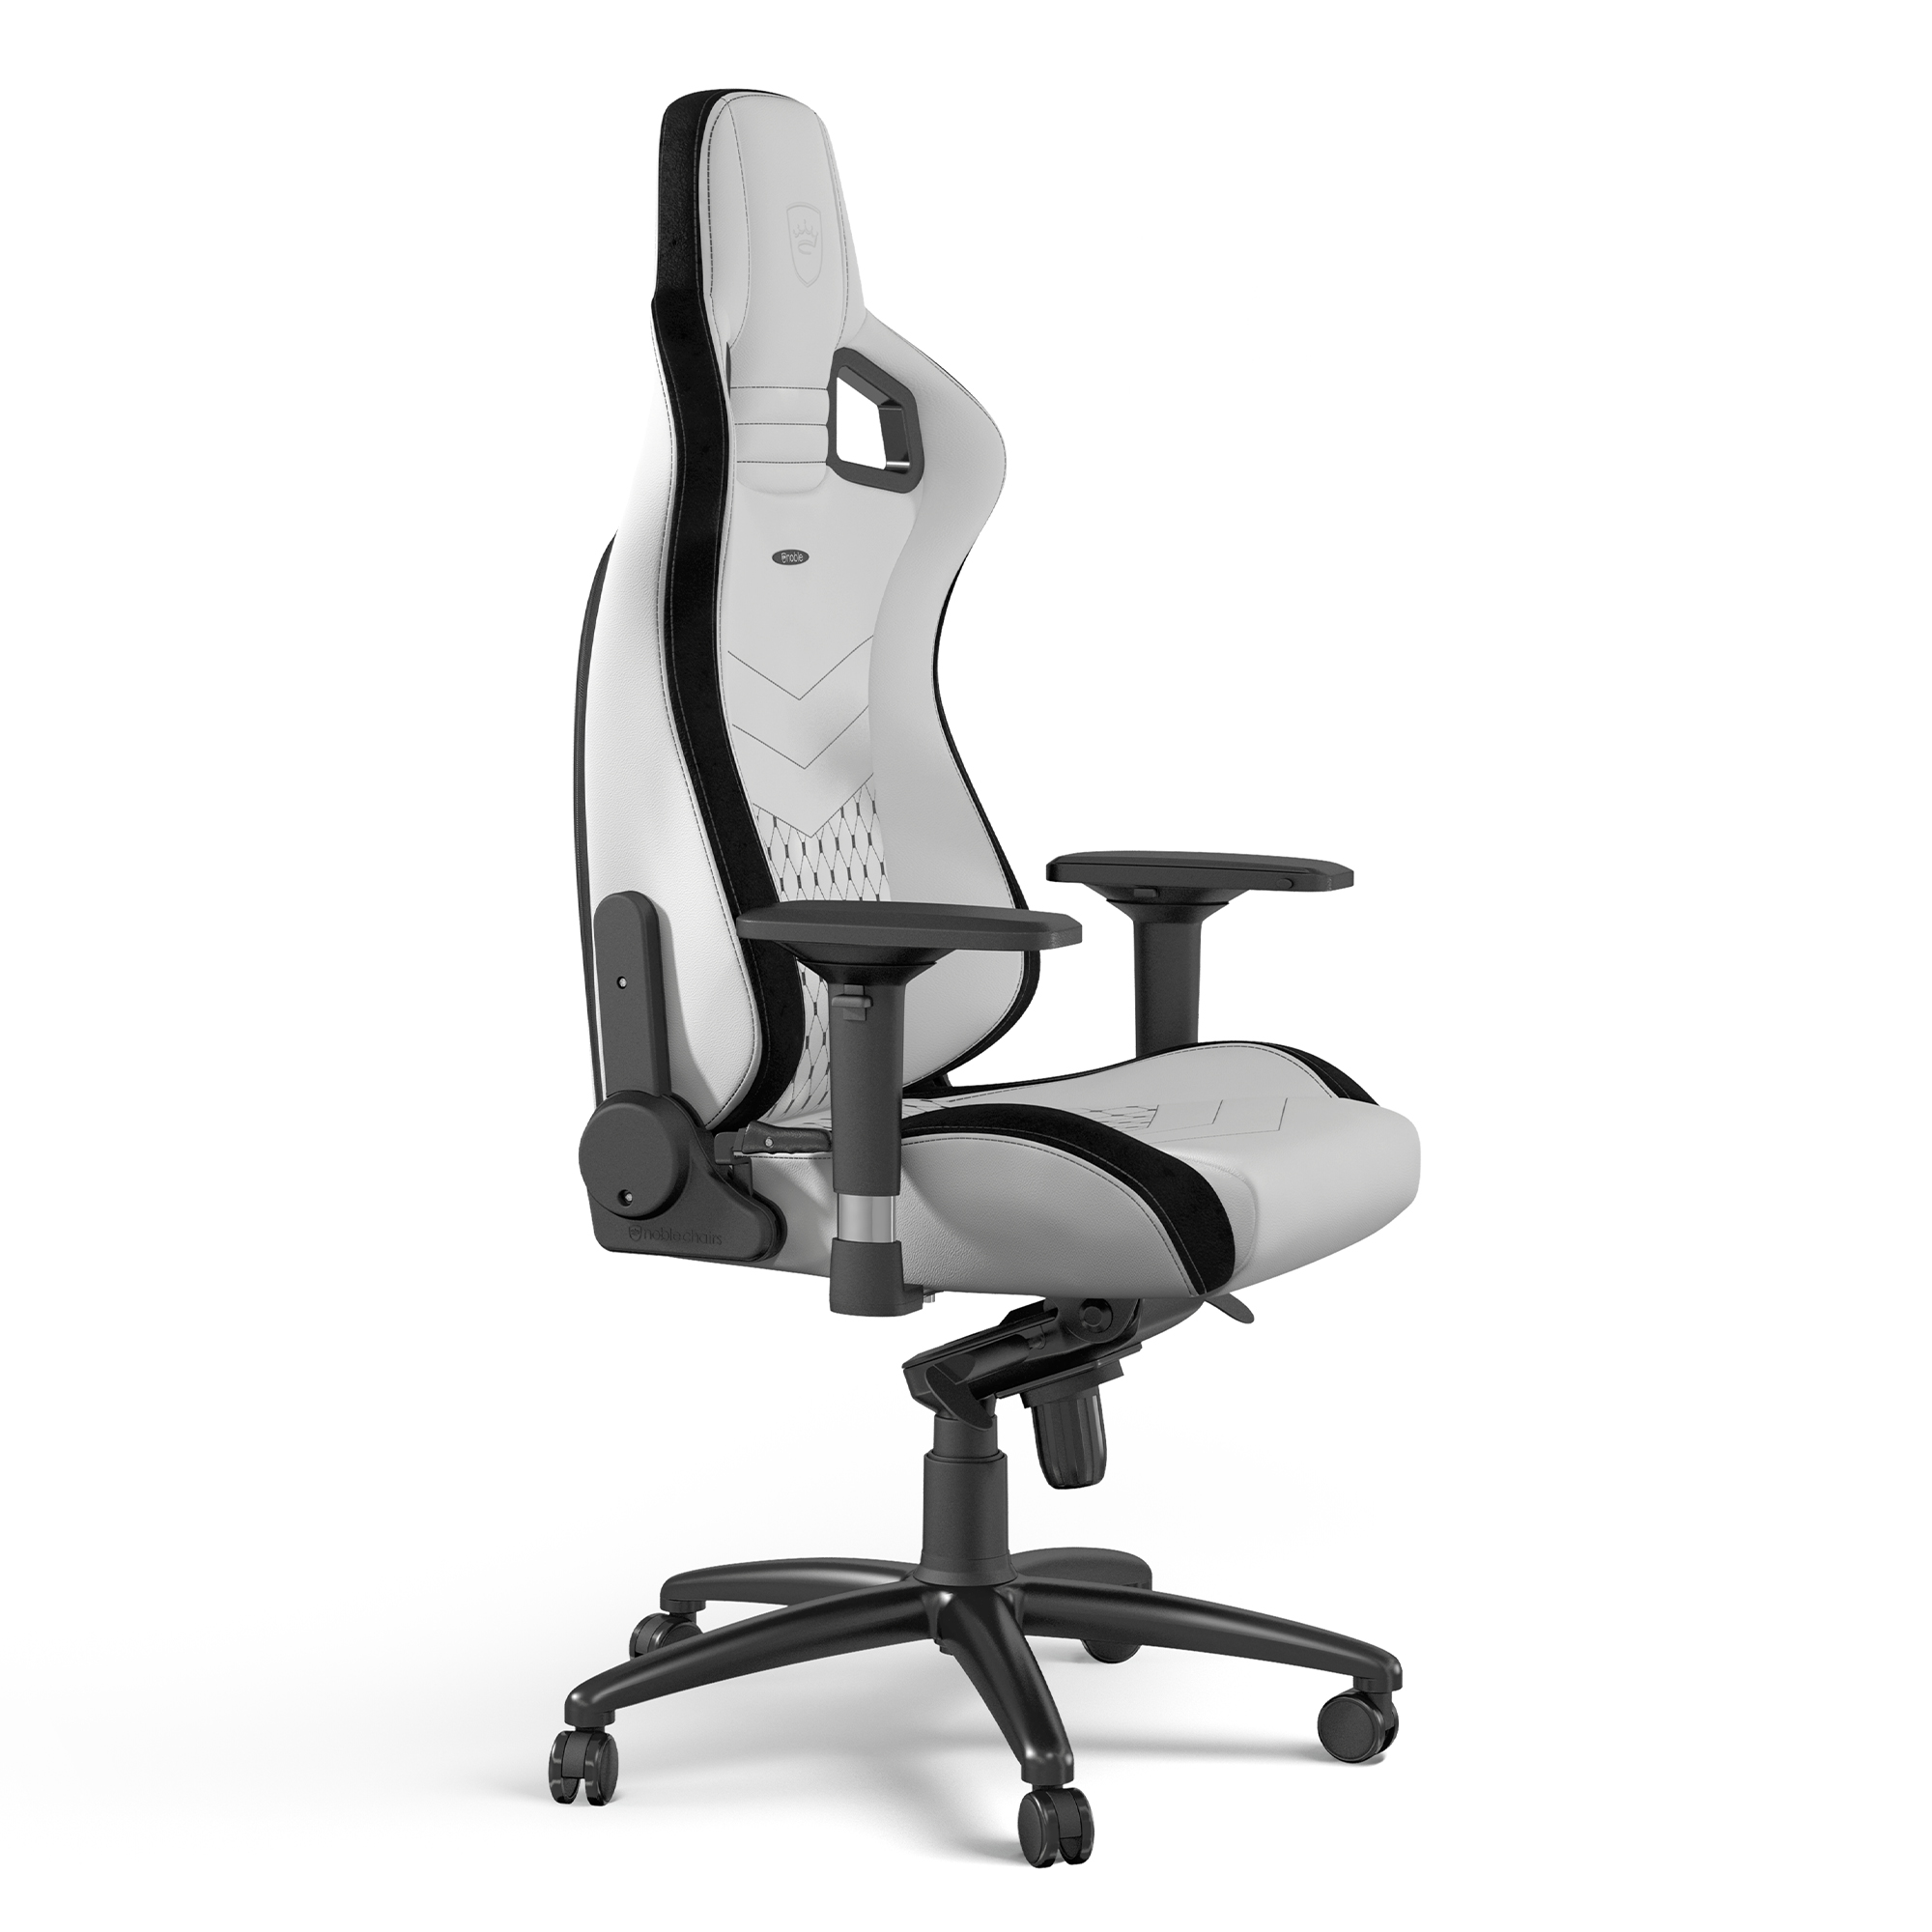 noblechairs - noblechairs EPIC Gaming Chair - White/Black